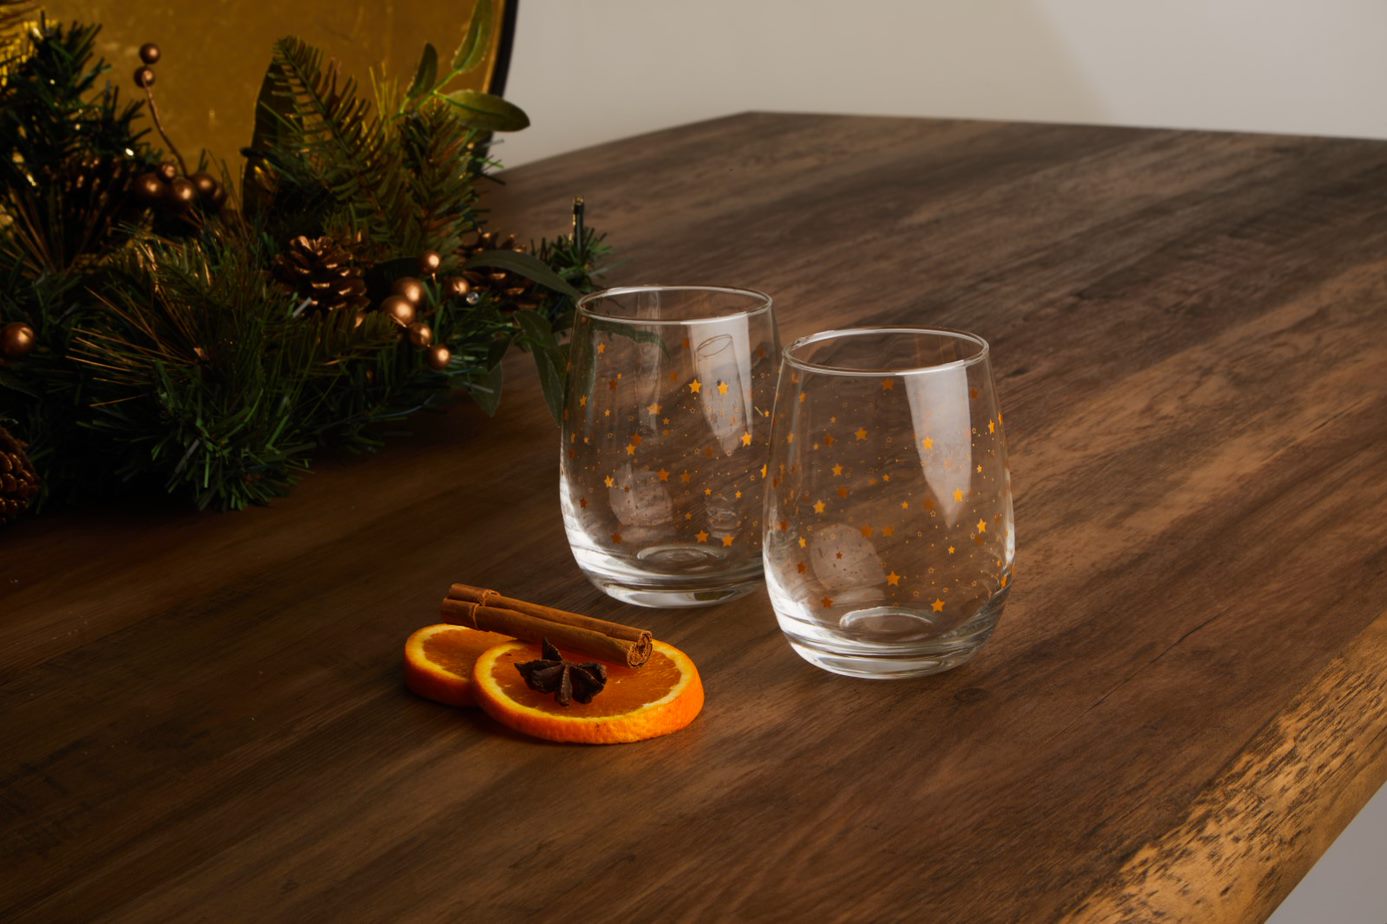 Aldi's Novelty Tumblers (Curved with gold stars)